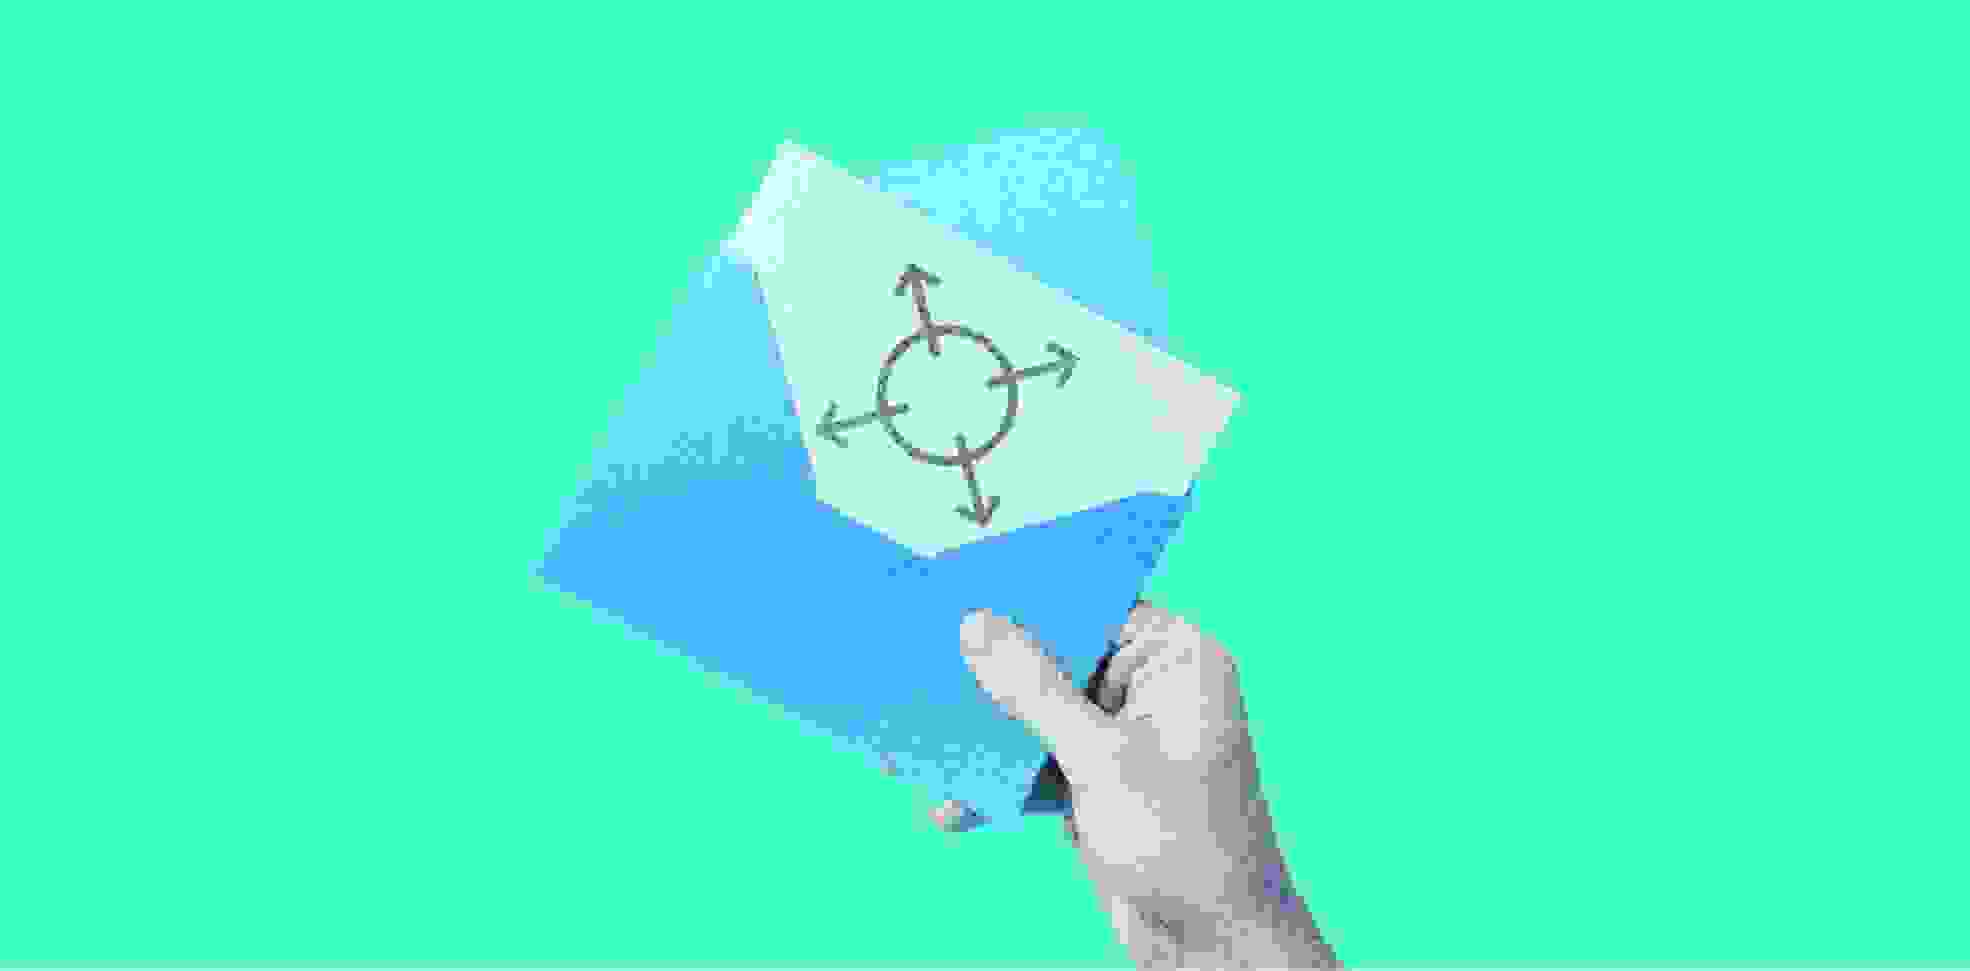 circle with arrows on a sheet in an envelope